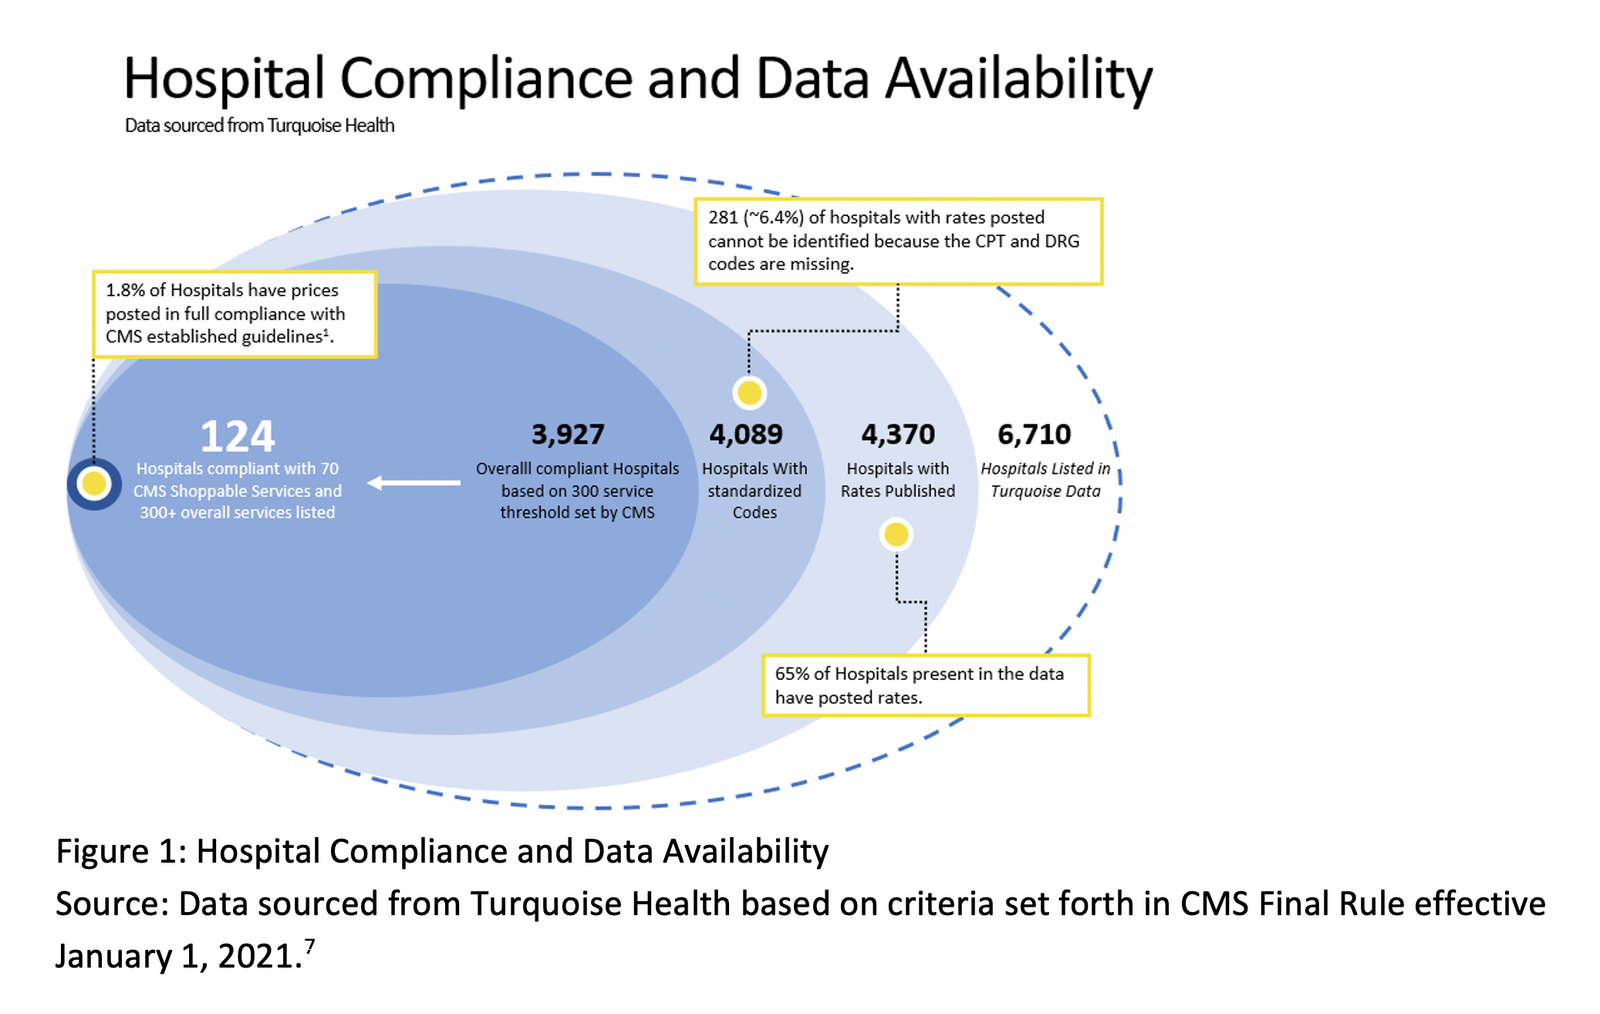 A graph showing hospital compliance and data availability